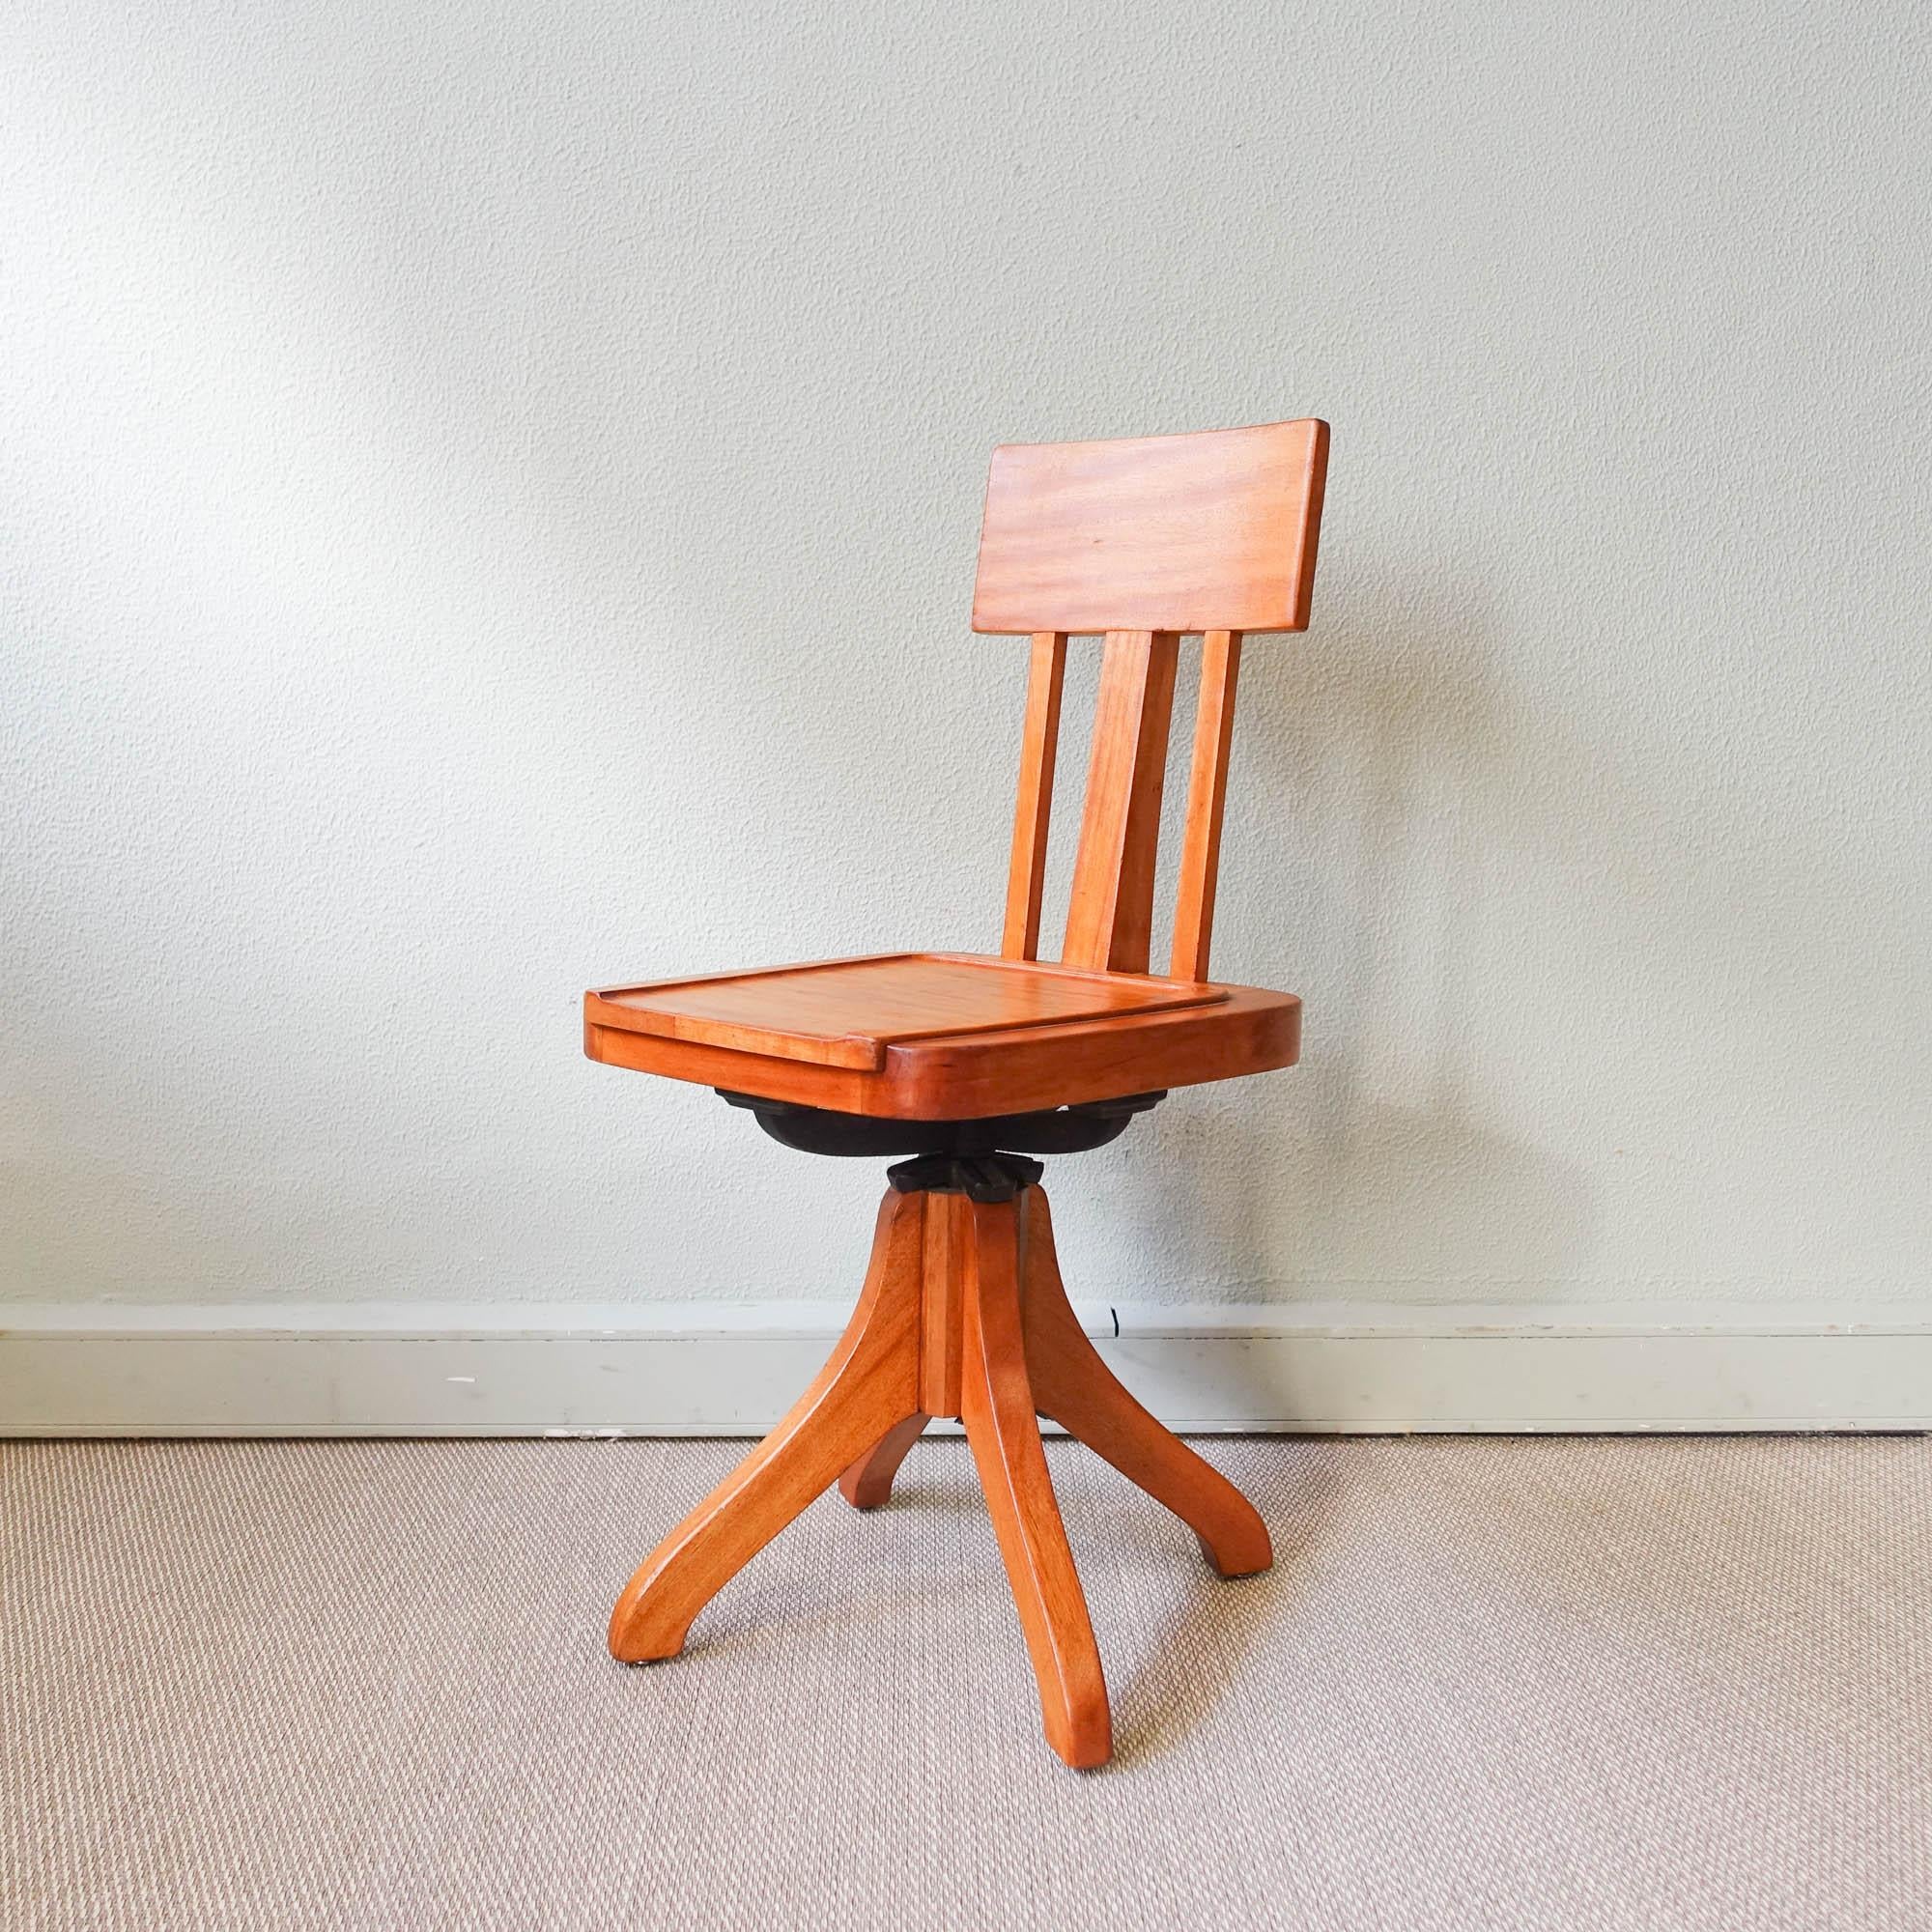 This typist chair was designed and produced by Móveis Olaio, during the 1940's, for the Agronomic Station in Oeiras, Portugal. The structure was fully restored and is made of solid beech wood. With the original tag from the producer. It is in a very